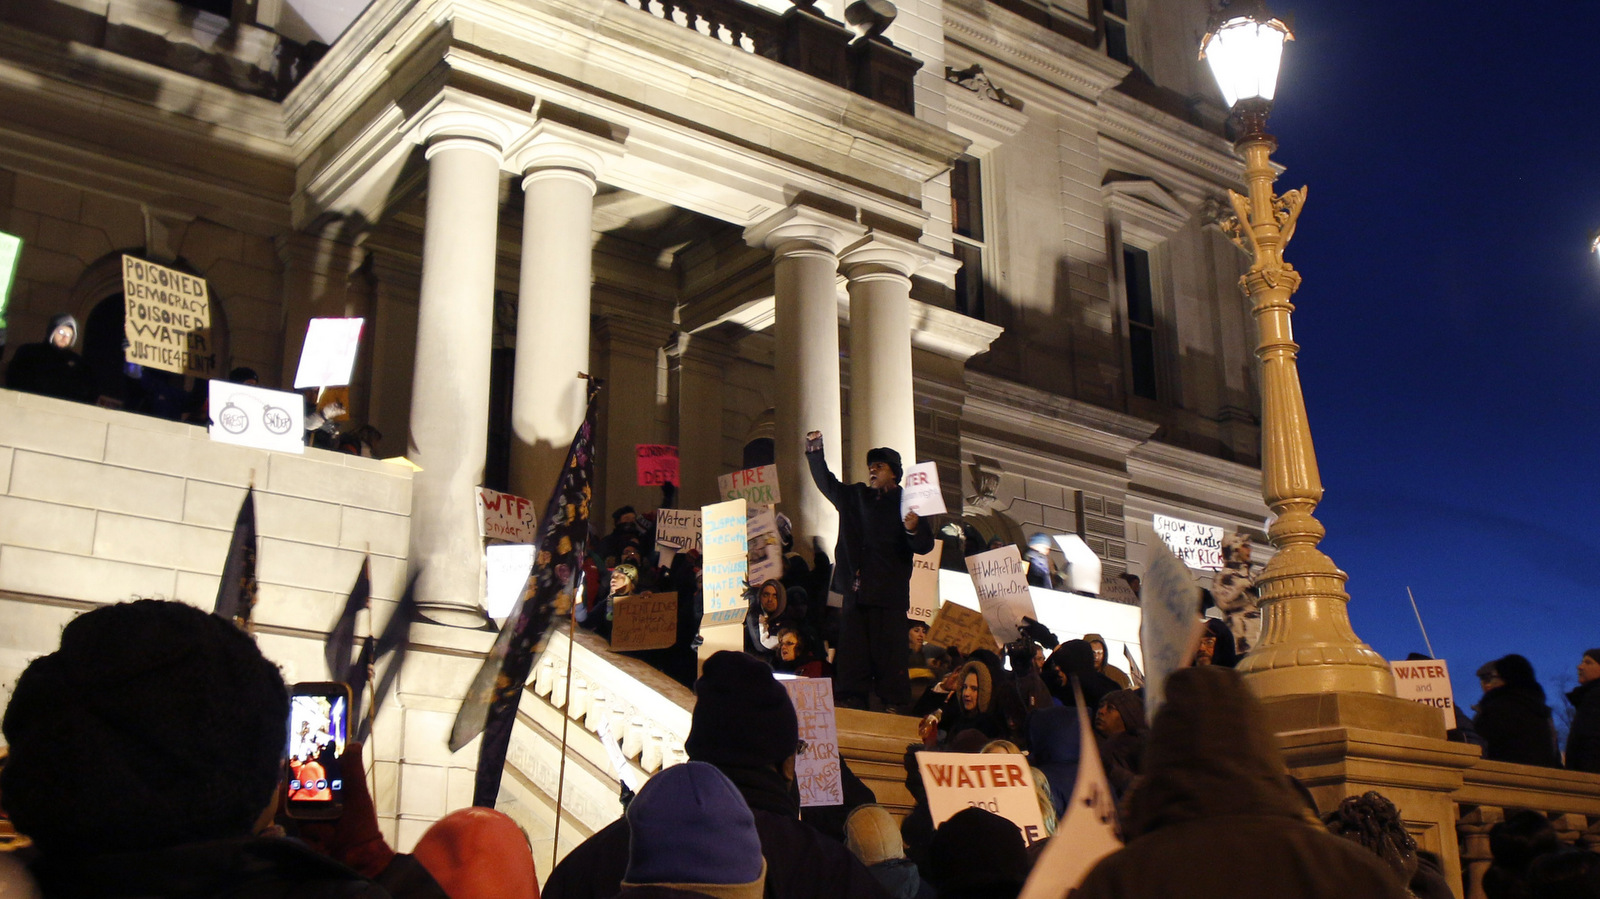 Protesters gather outside the state Capitol before Michigan Gov. Rick Snyder's State of the State address, Tuesday, Jan. 19, 2016, in Lansing, Mich. With the water crisis gripping Flint threatening to overshadow nearly everything else he has accomplished, the Republican governor again pledged a fix Tuesday night during his annual State of the State speech. (AP Photo/Al Goldis)